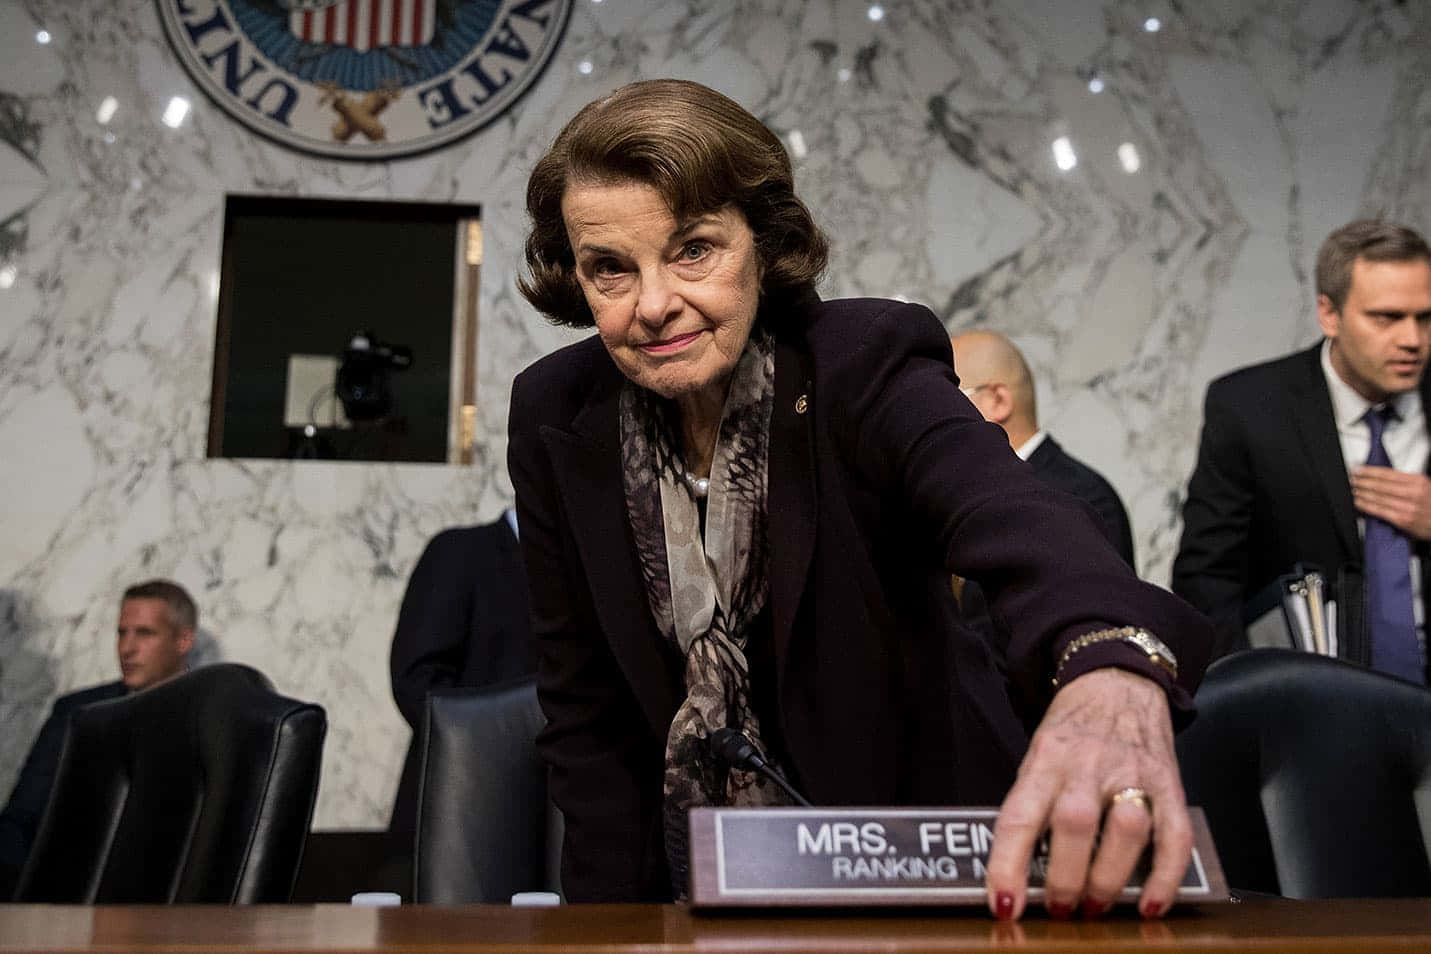 Dianne Feinstein With Her Name Placard Wallpaper